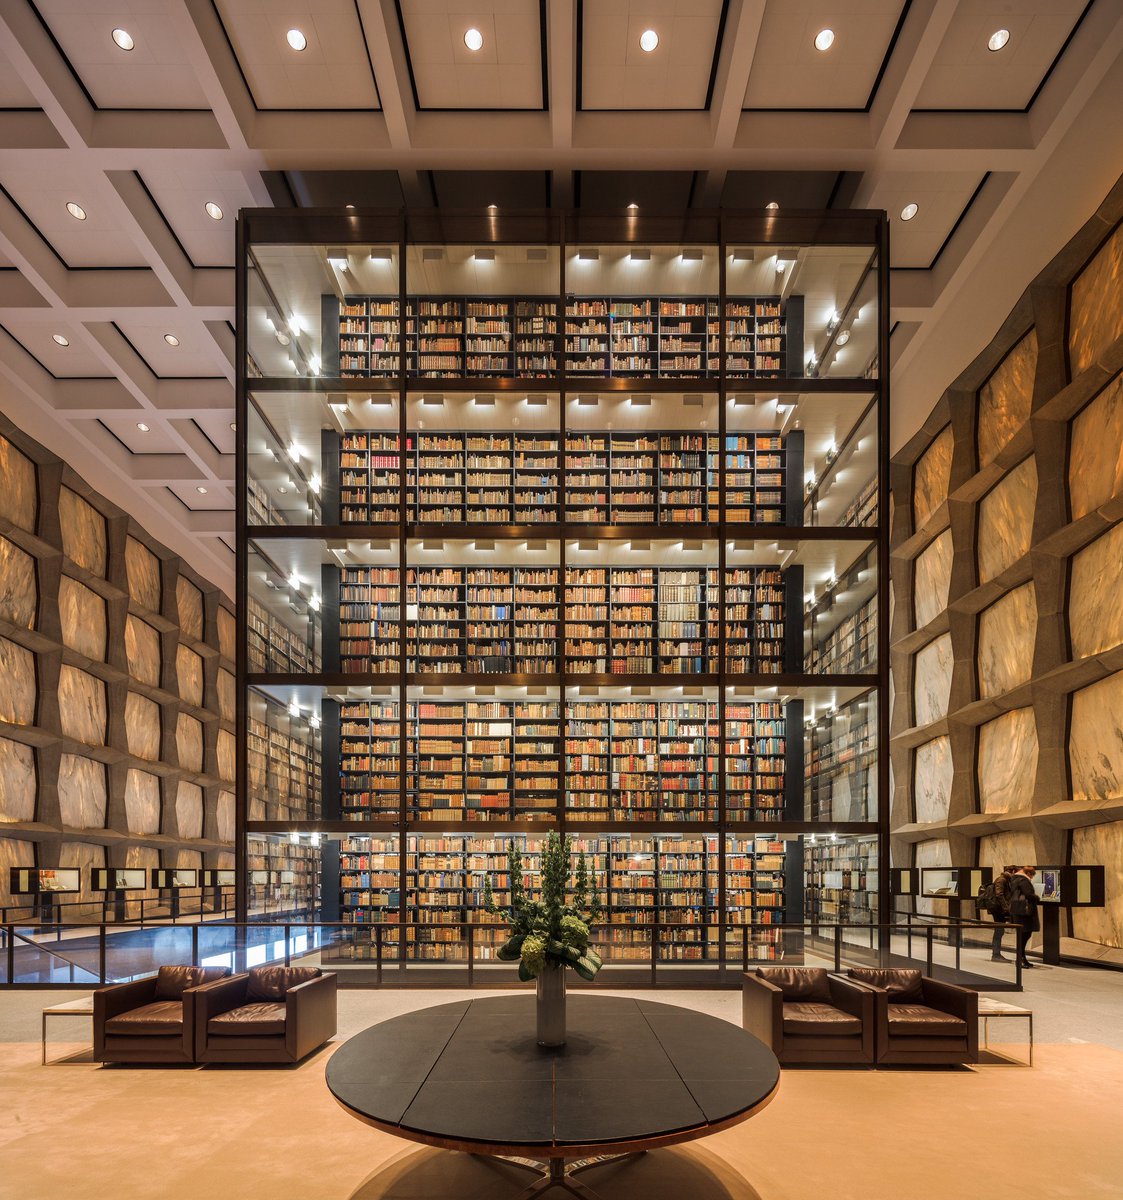 35. The Beinecke Rare Book & Manuscript Library, Yale University